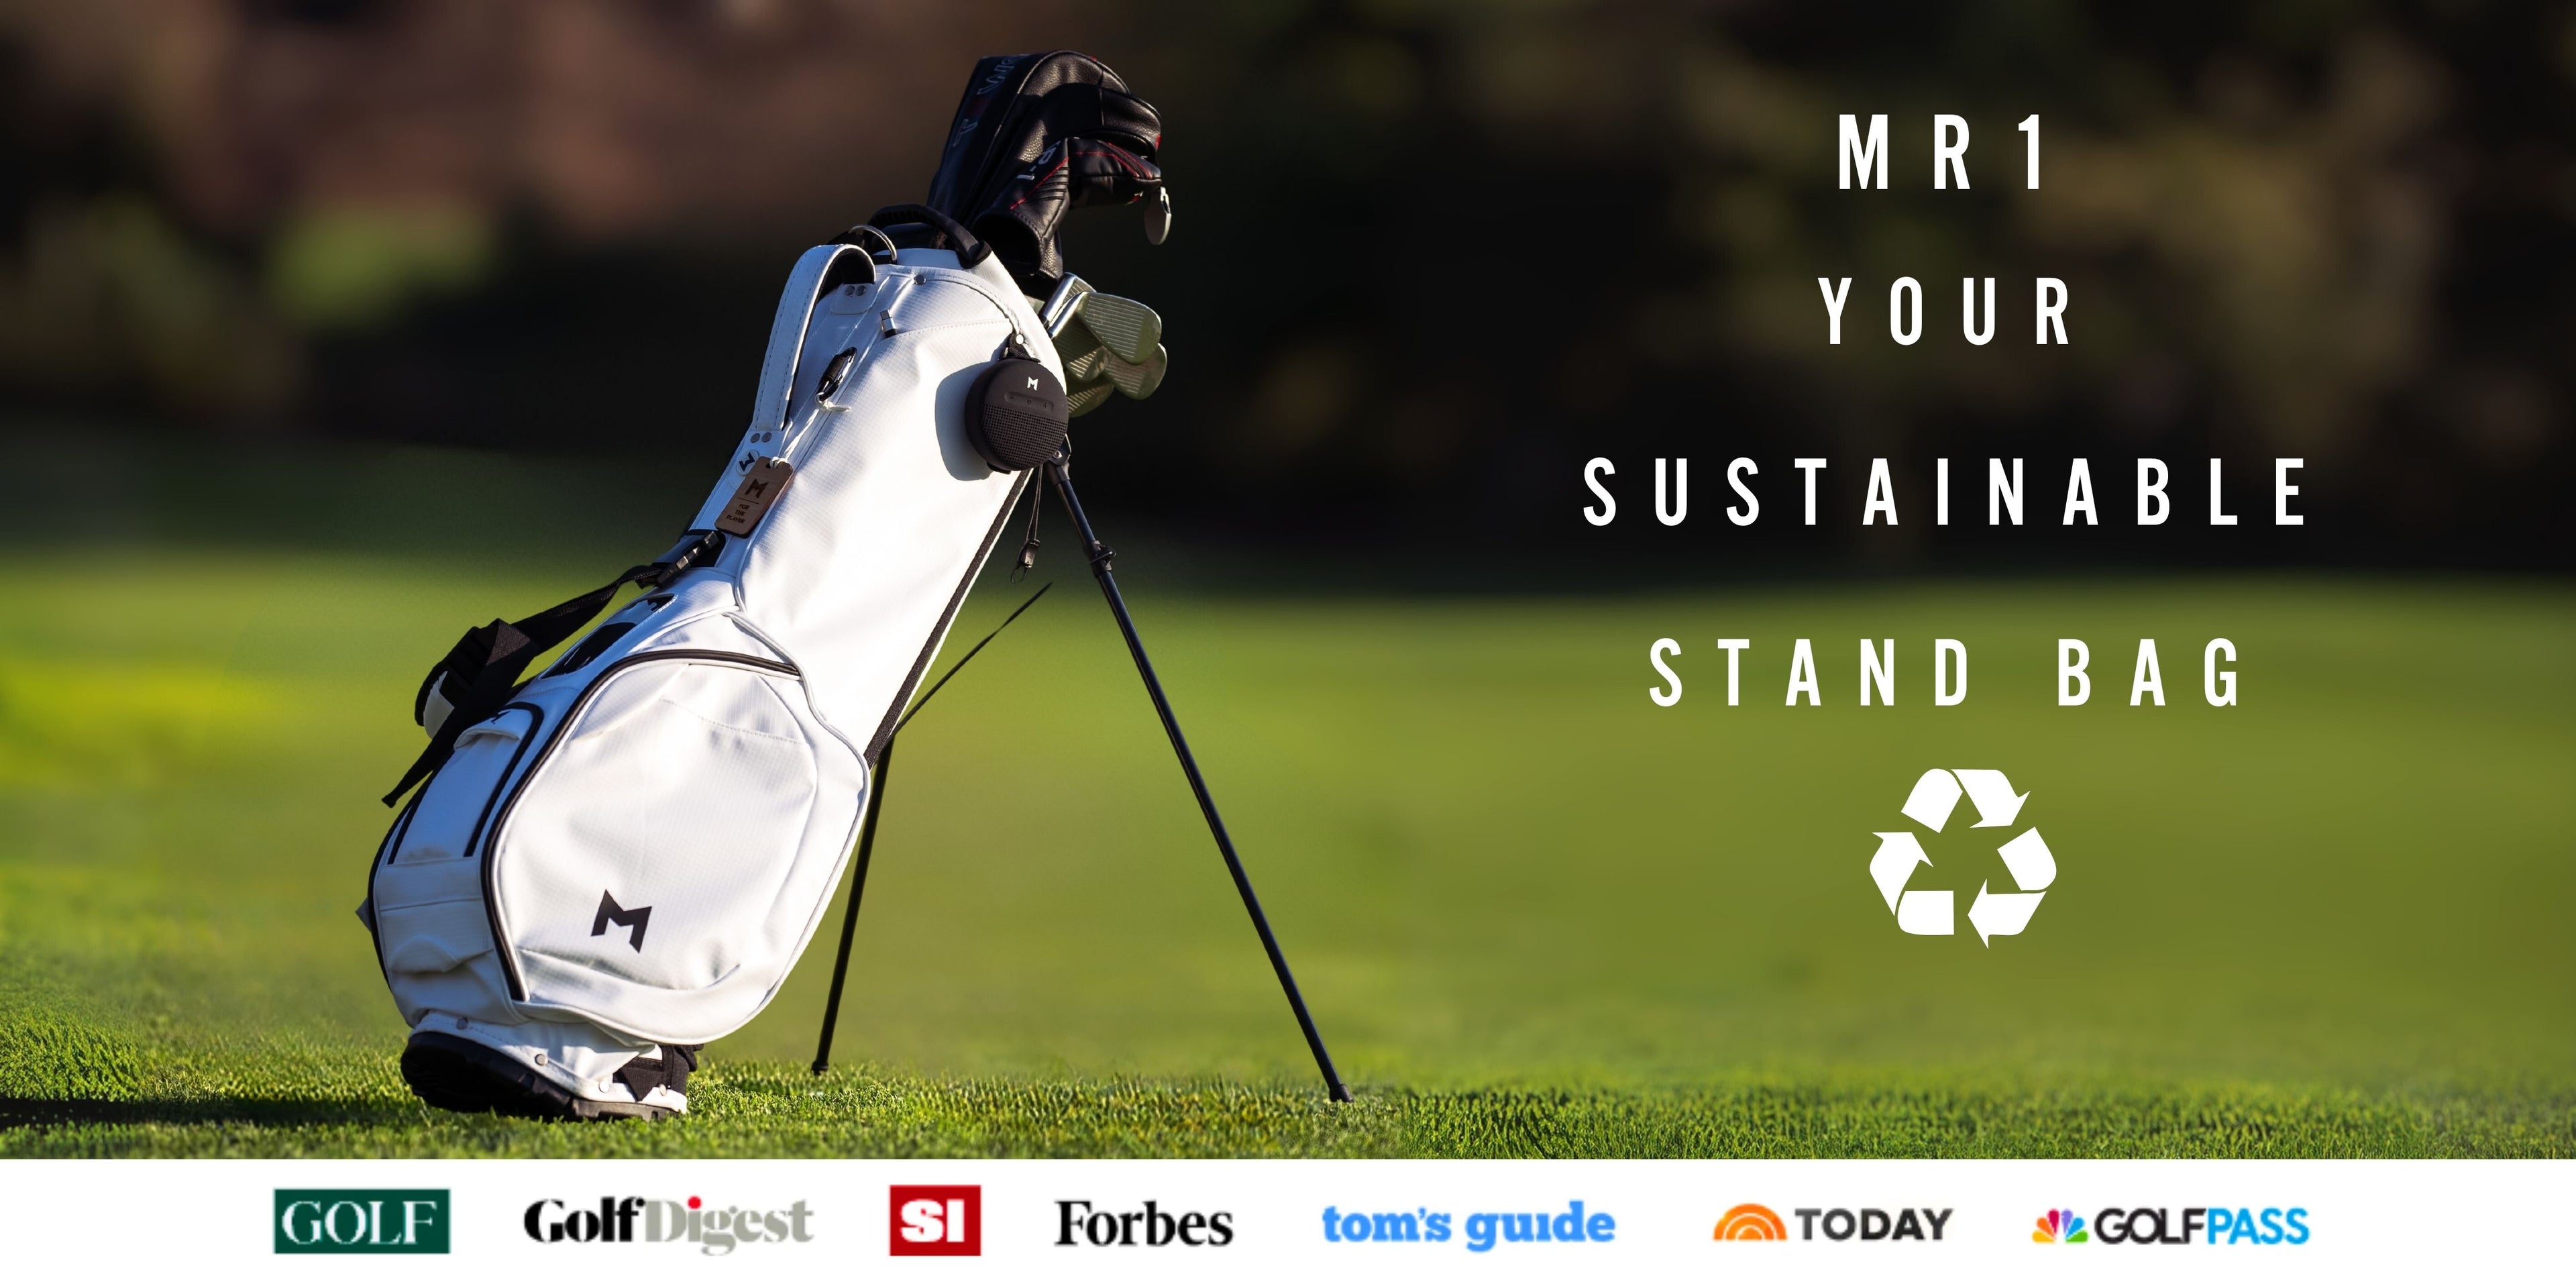 This is the white MNML GOLF MR1 Eco Friendly golf bag, the best features for the modern golfer.